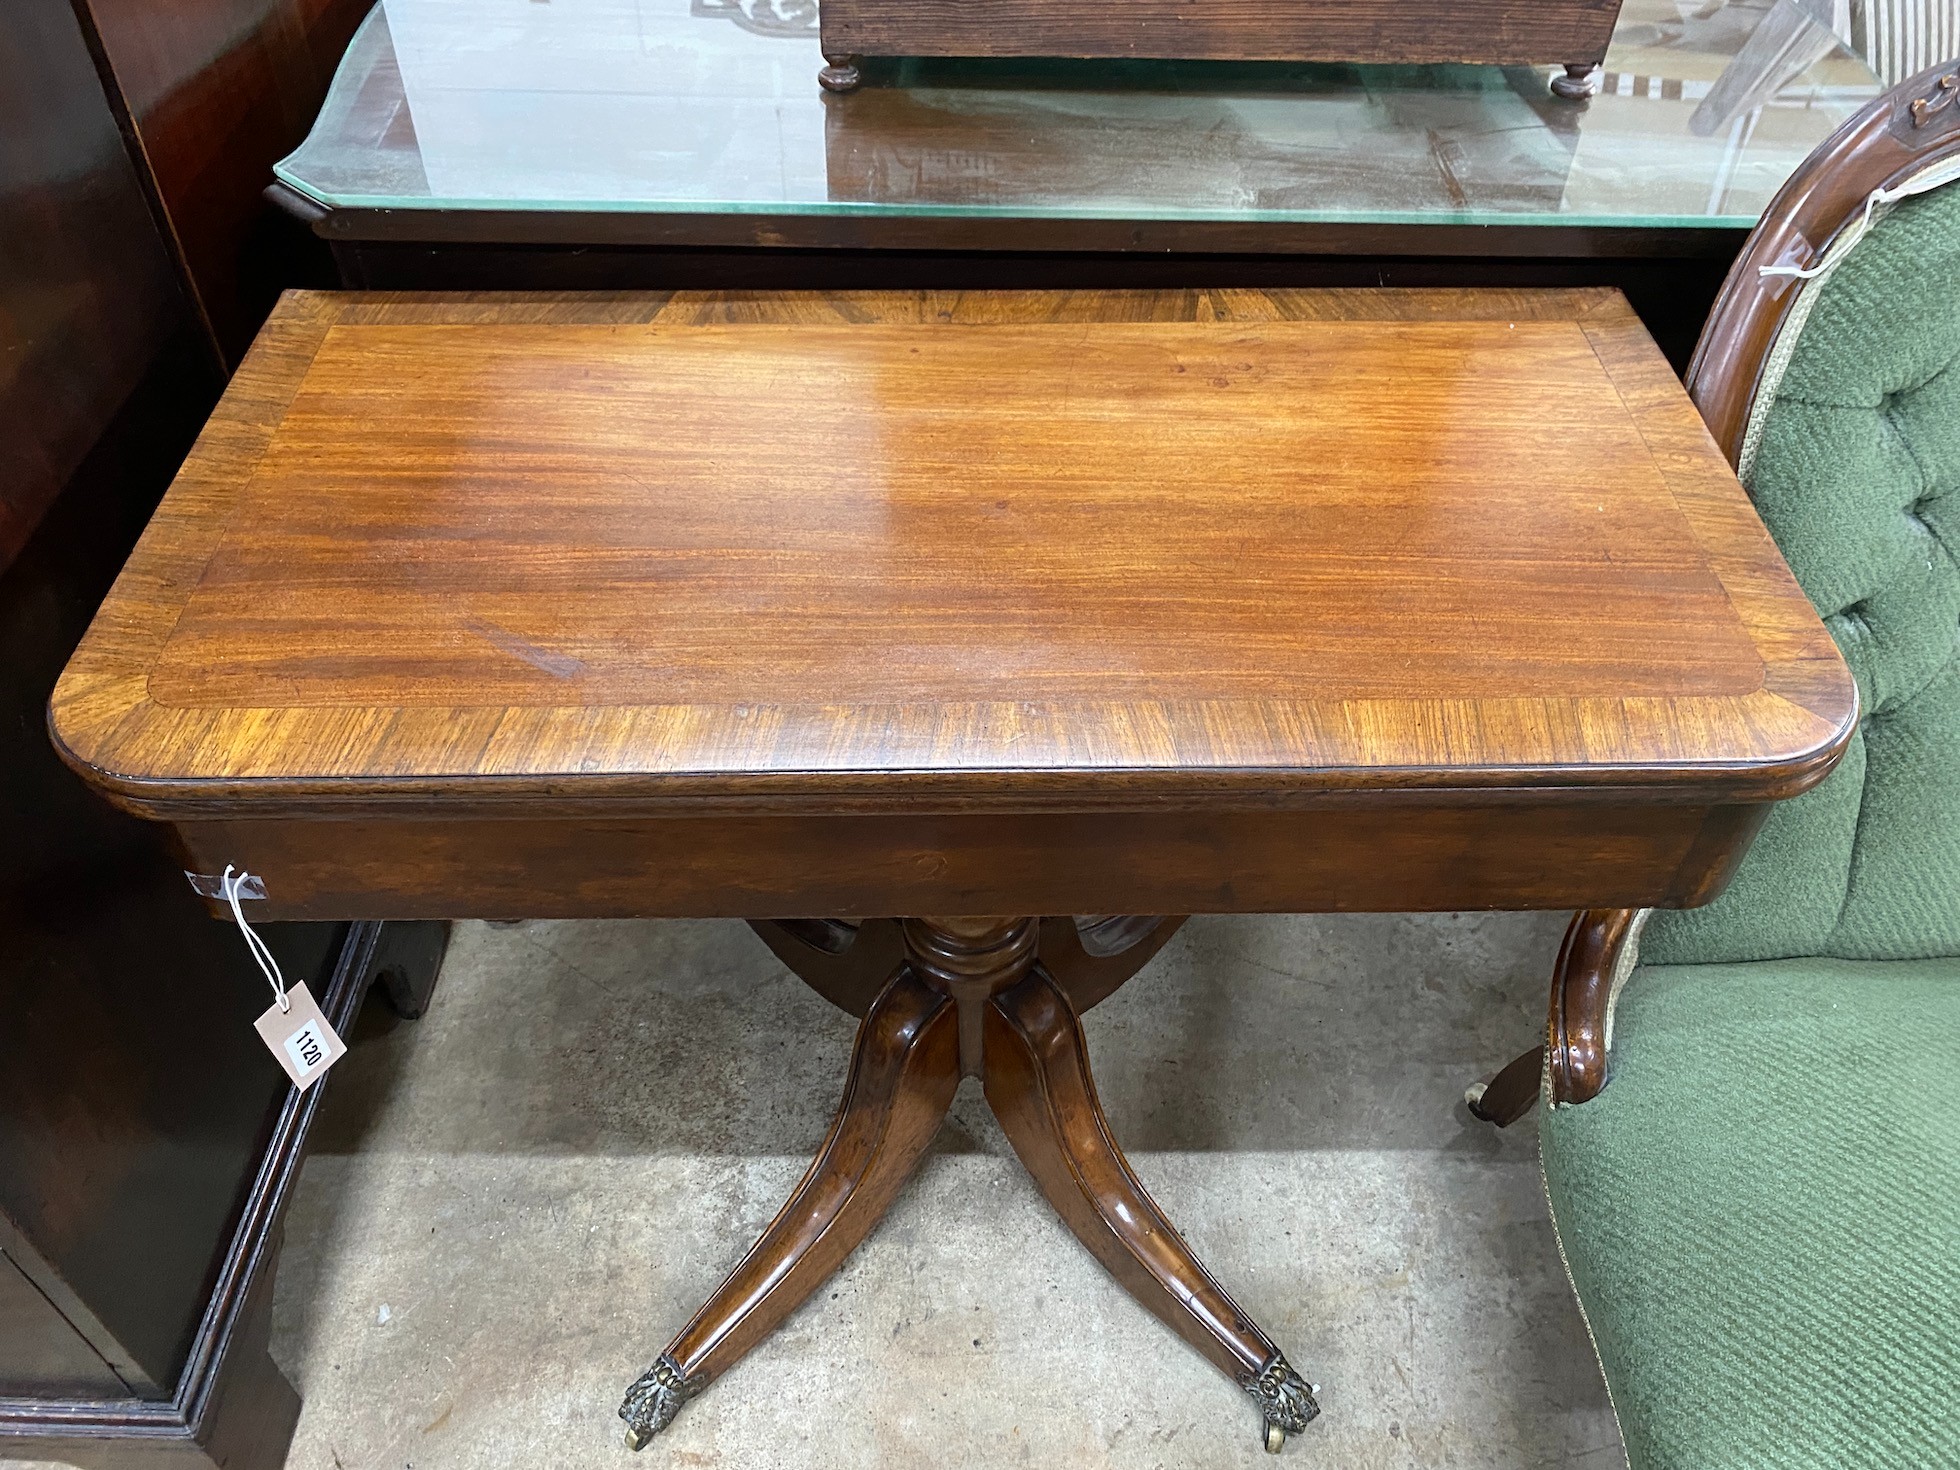 A Regency rosewood banded rectangular mahogany folding tea table, width 92cm, depth 45cm, height 73cm *Please note the sale commences at 9am.